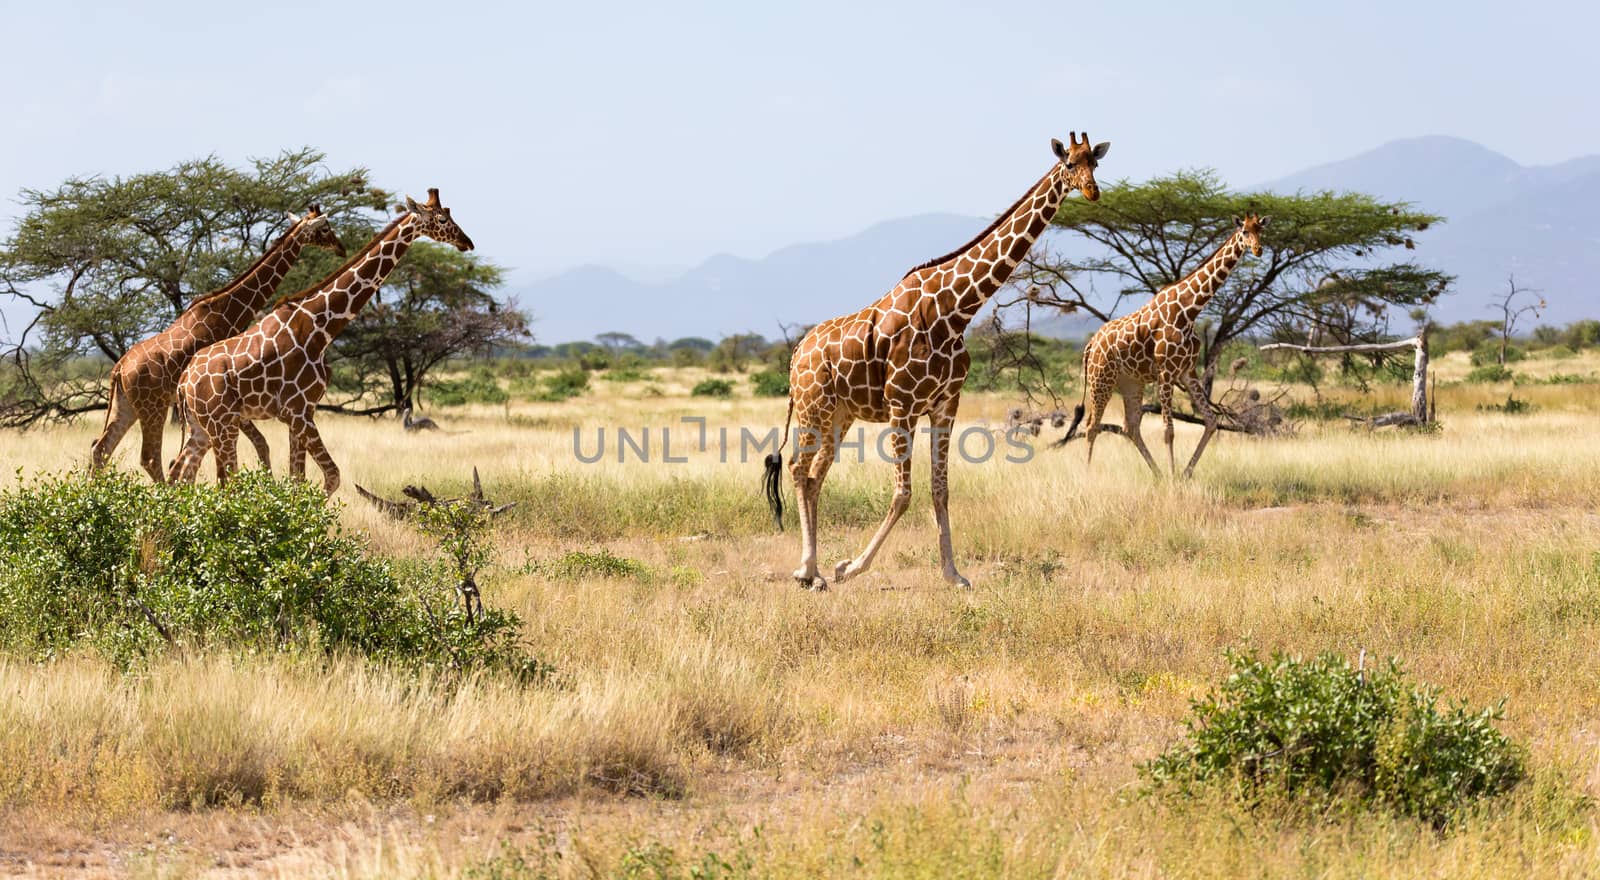 Giraffes in the savannah of Kenya with many trees and bushes in by 25ehaag6